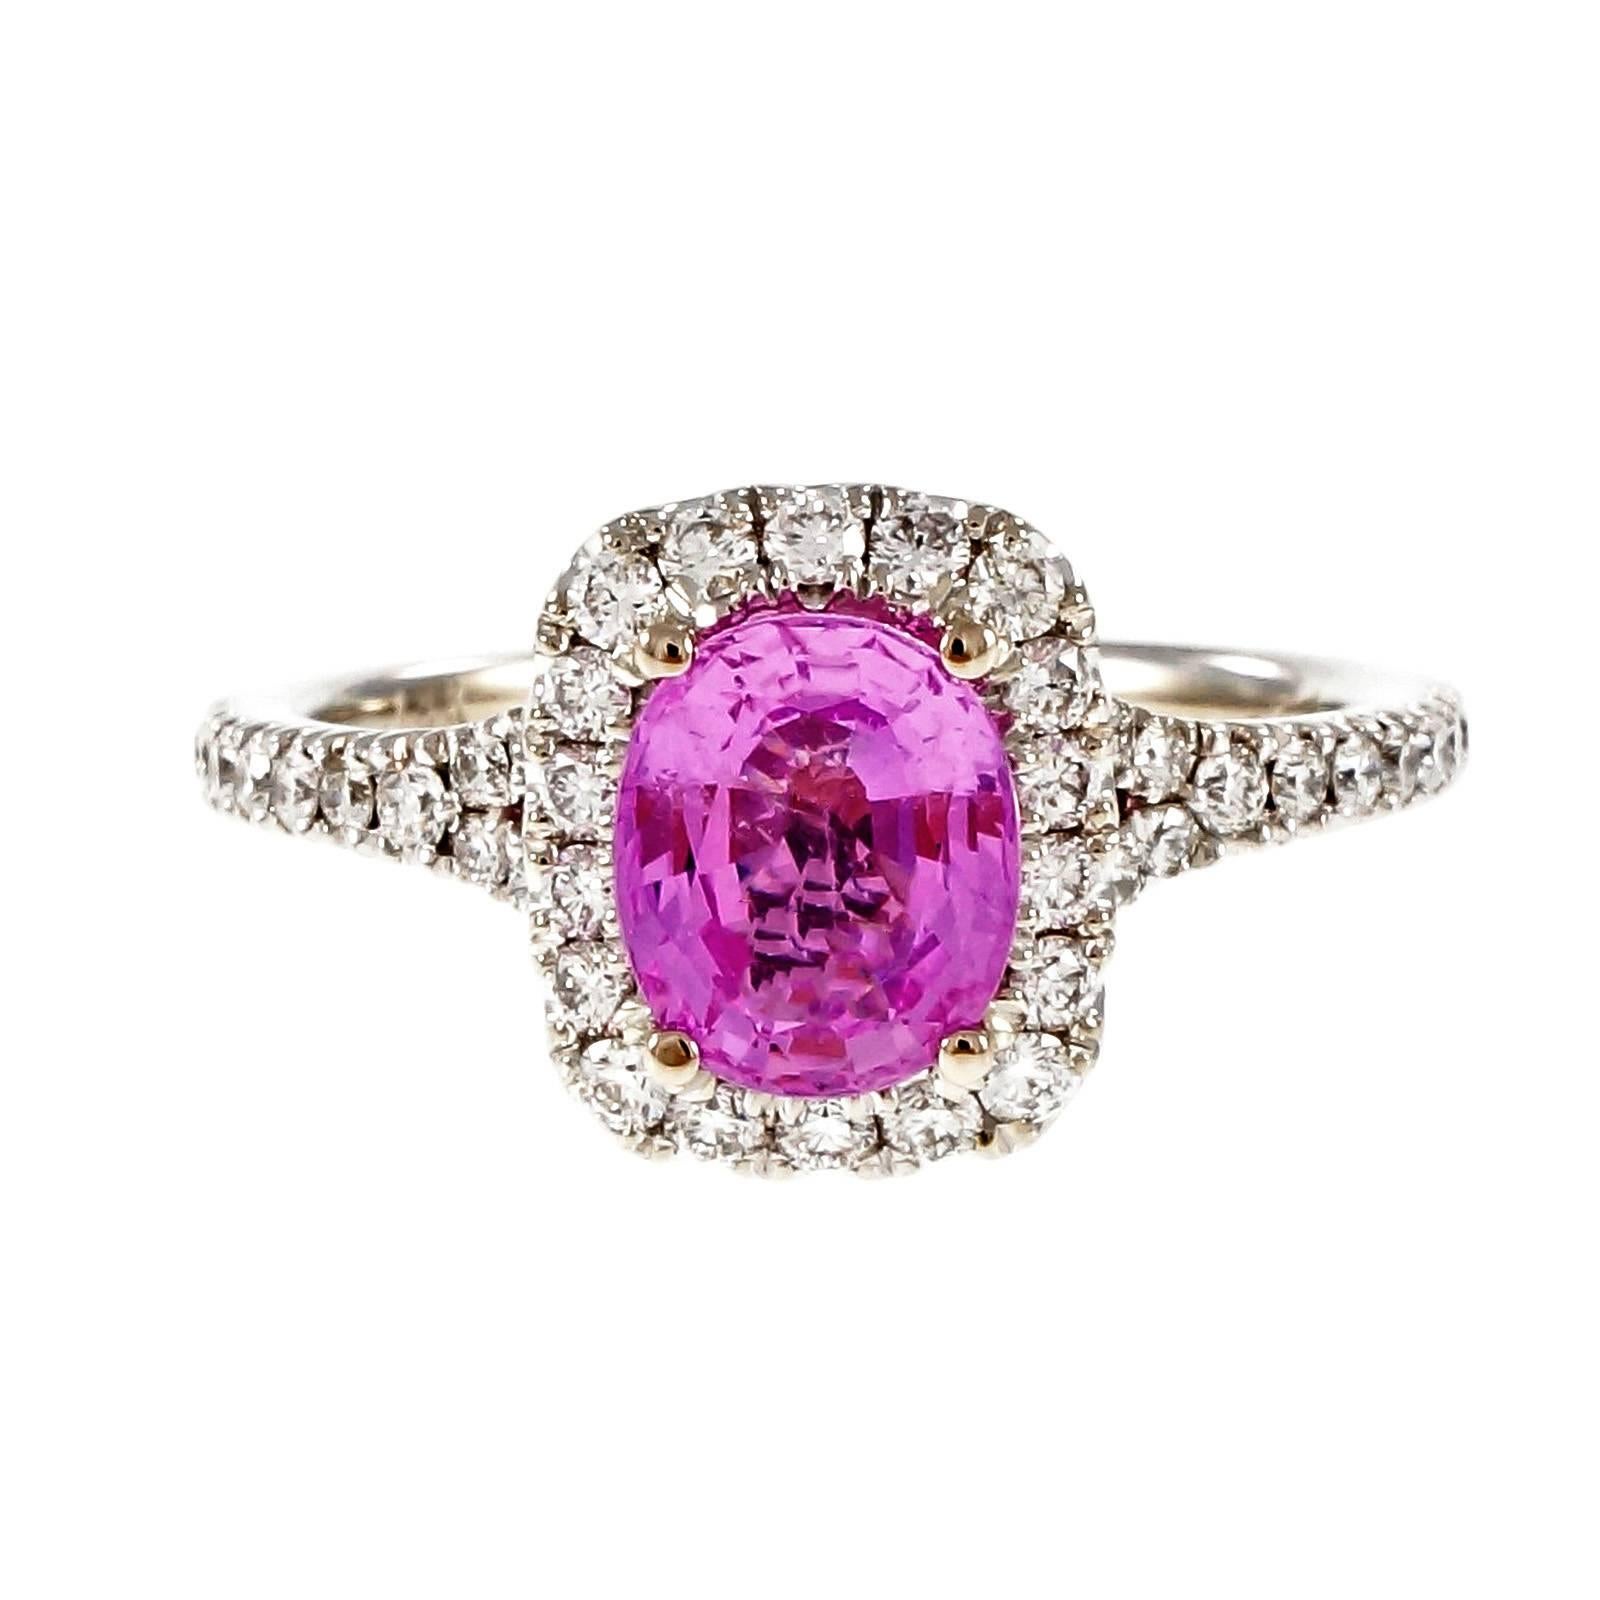 Peter Suchy 1.58 Carat Hot Pink Sapphire Diamond Halo Gold Engagement Ring 